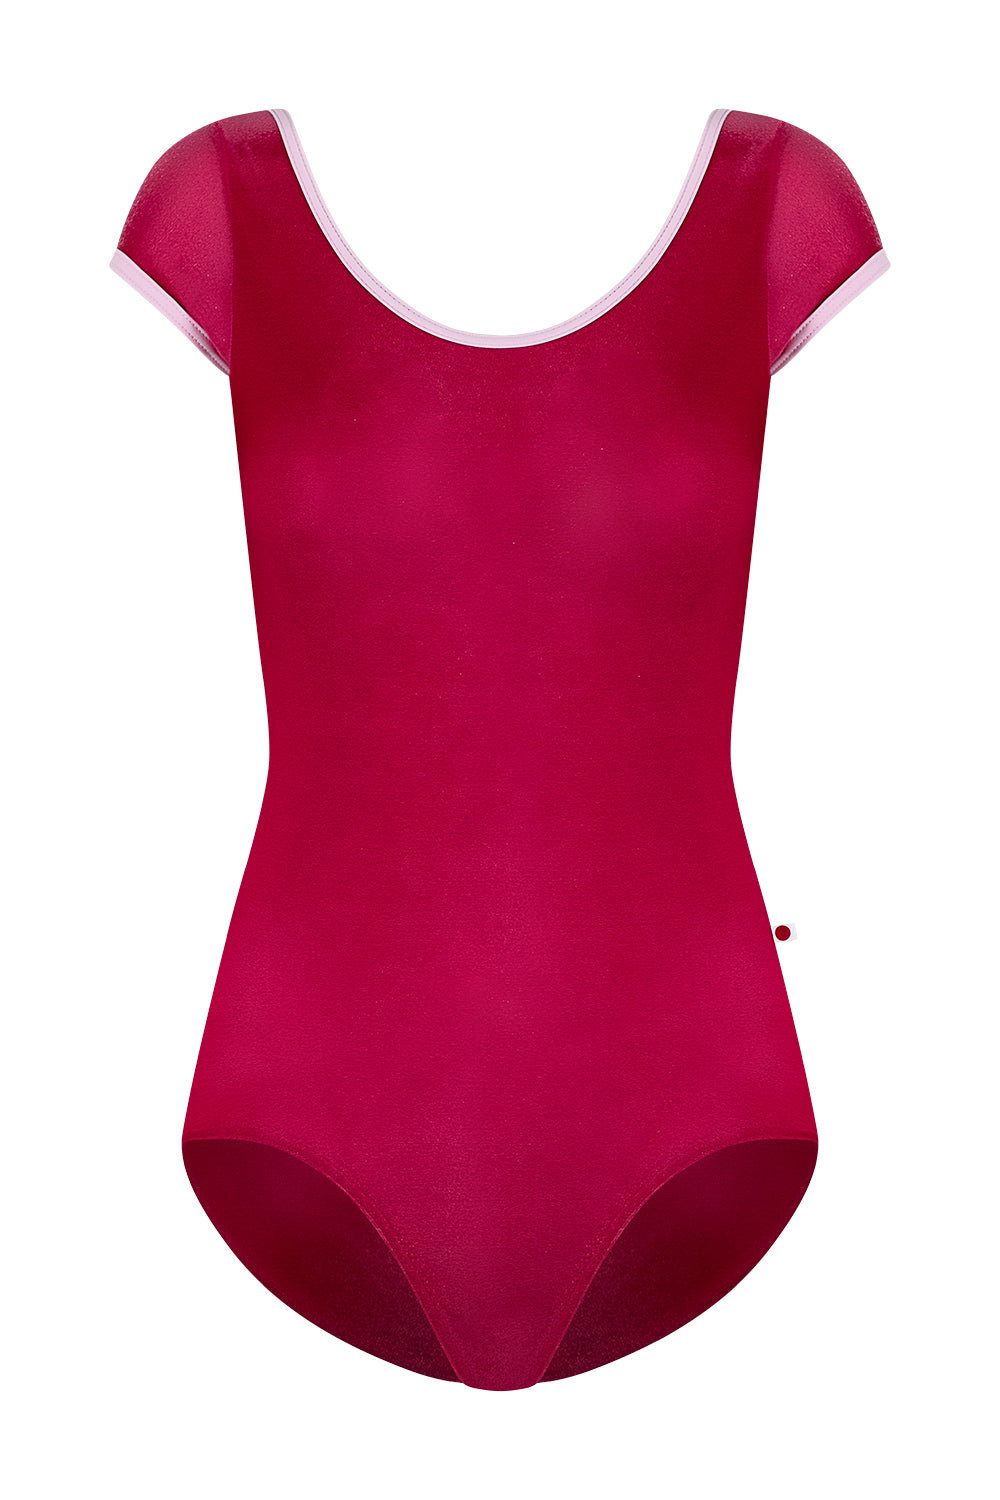 Veronique leotard in V-Roxy body color with T-Rose trim color and cap sleeves